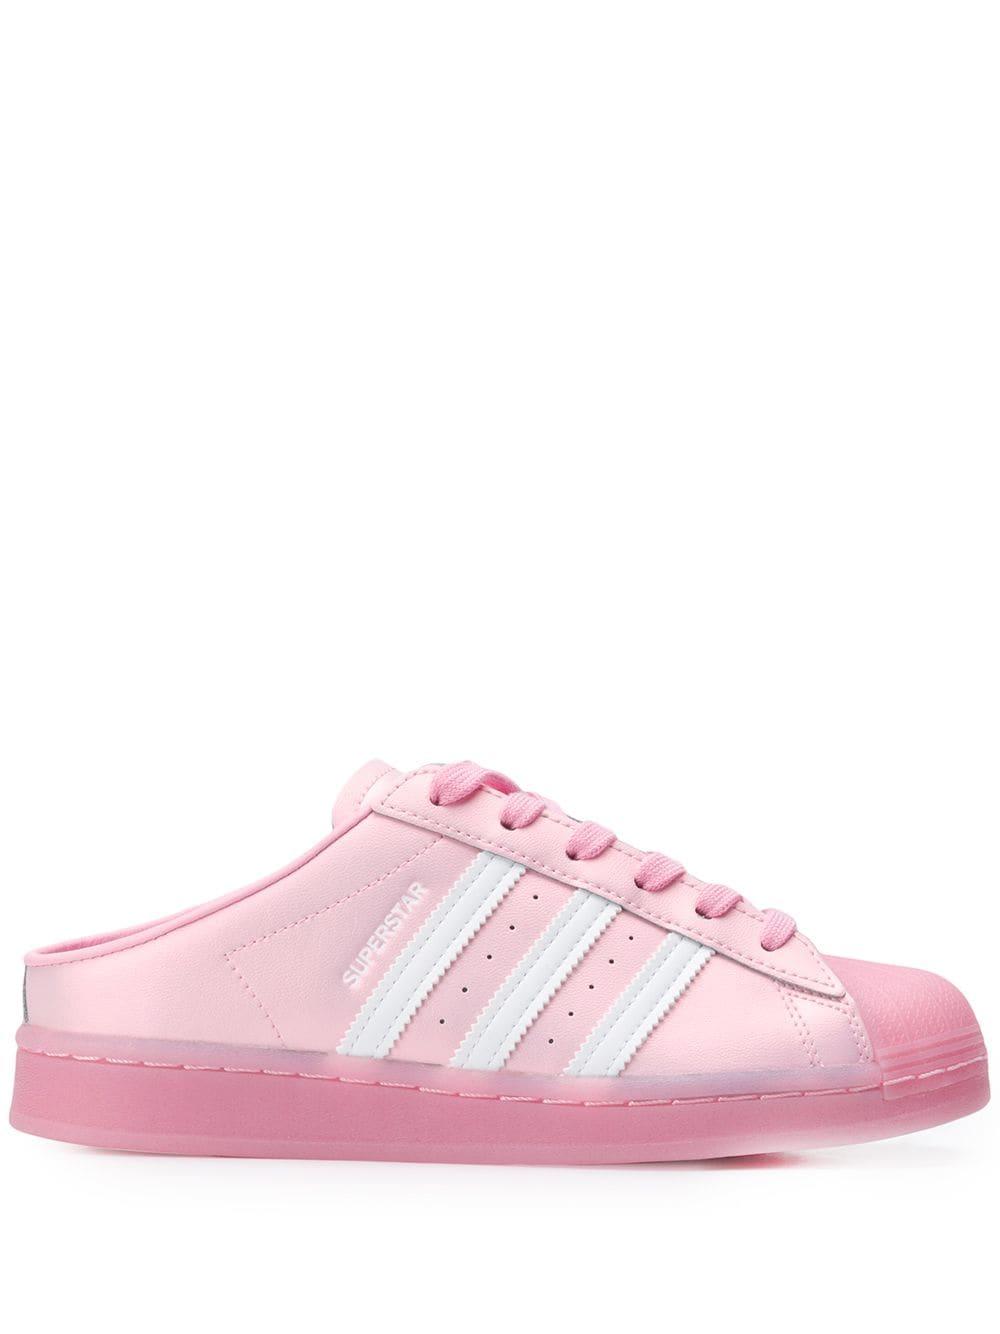 adidas Leather Superstar Mule Sneakers in Pink | Lyst